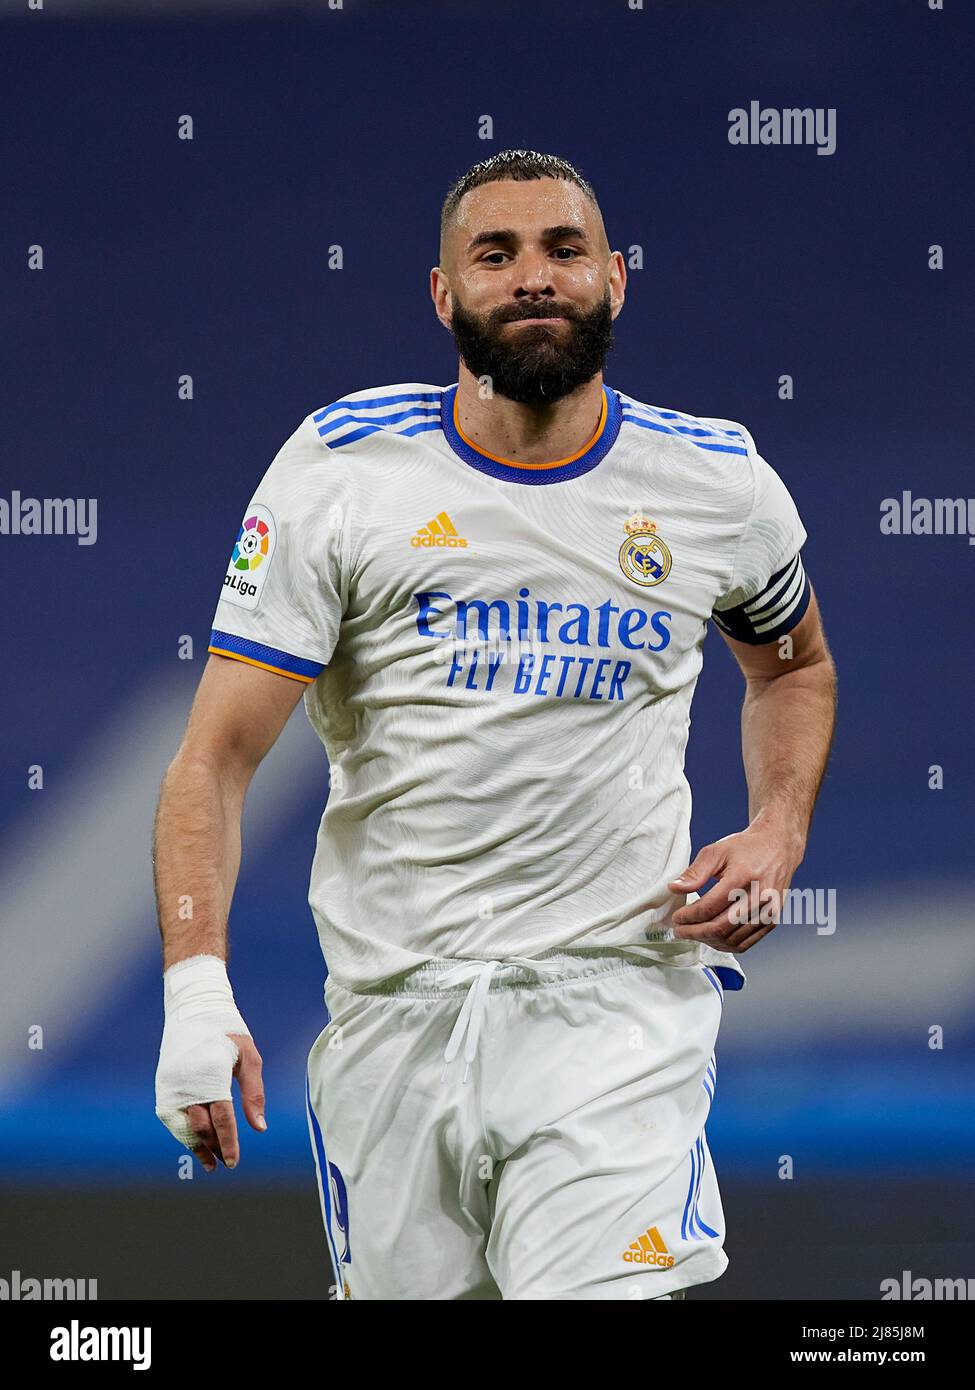 Karim Benzema of Real Madrid during the La Liga match between Real Madrid and Levante UD played at Santiago Bernabeu Stadium on May 12, 2022 in Madrid, Spain. (Photo by Ruben Albarran / PRESSINPHOTO) Stock Photo